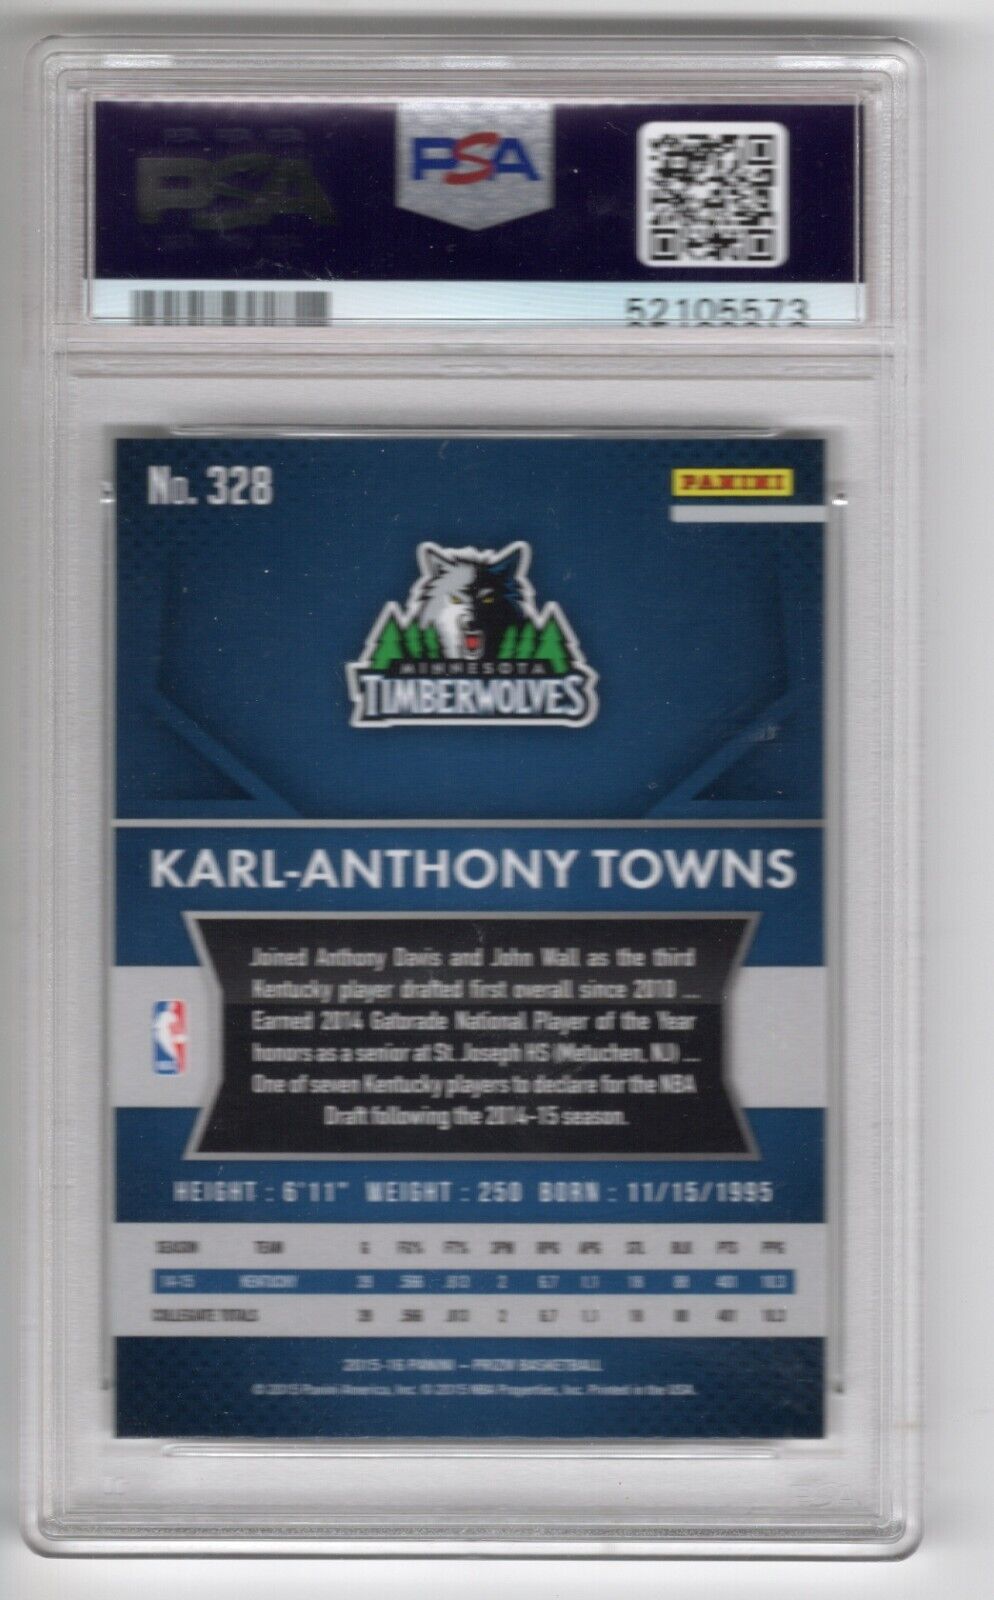 2015/16 Panini Prizm Basketball #328 Karl-Anthony Towns Rookie Card RC PSA 10 - 643-collectibles